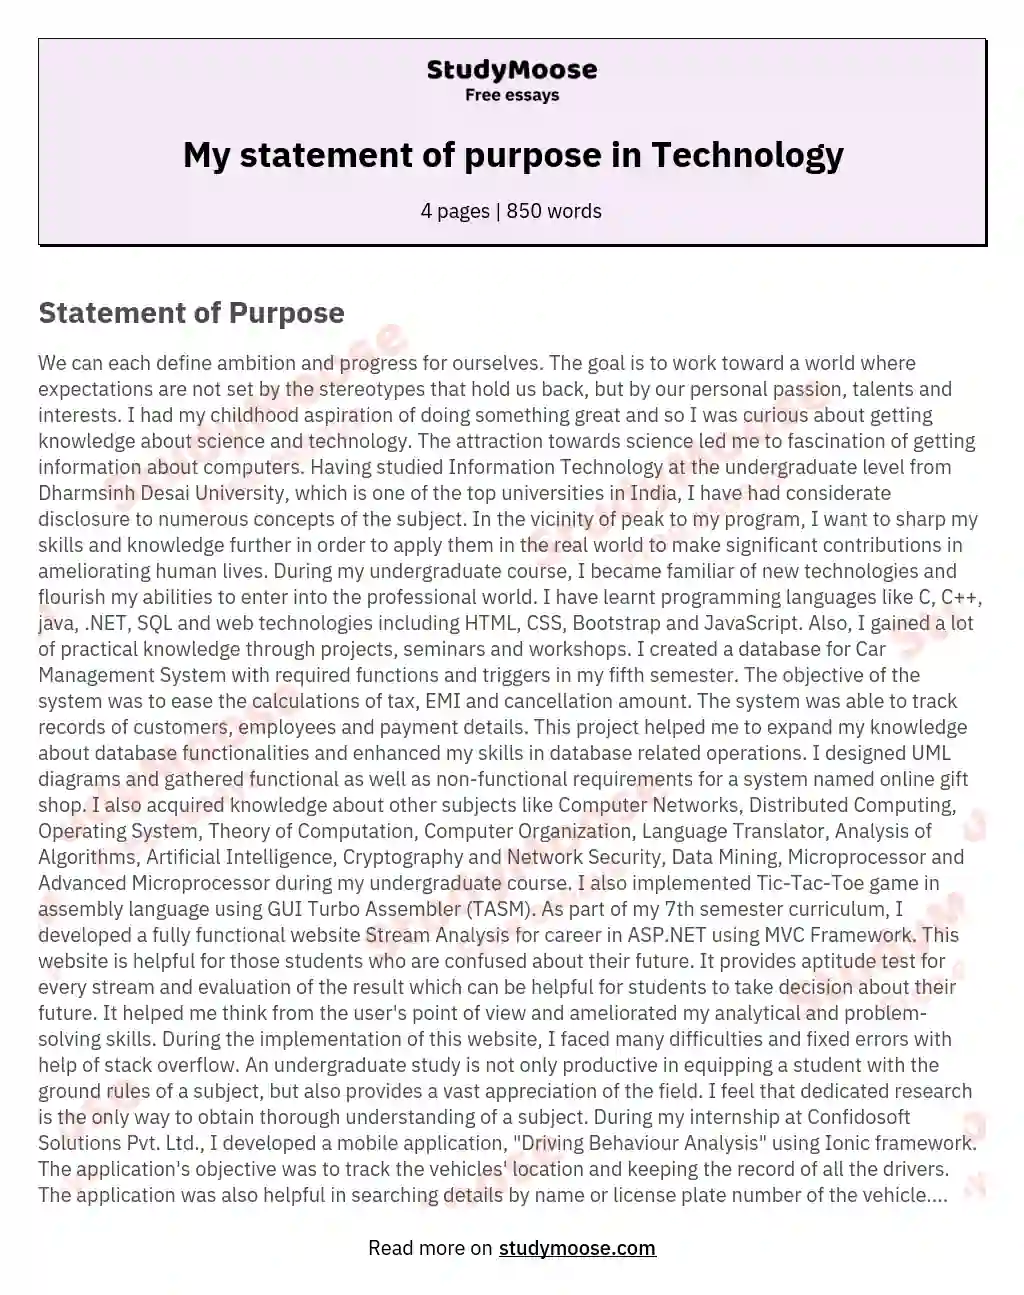 My statement of purpose in Technology essay